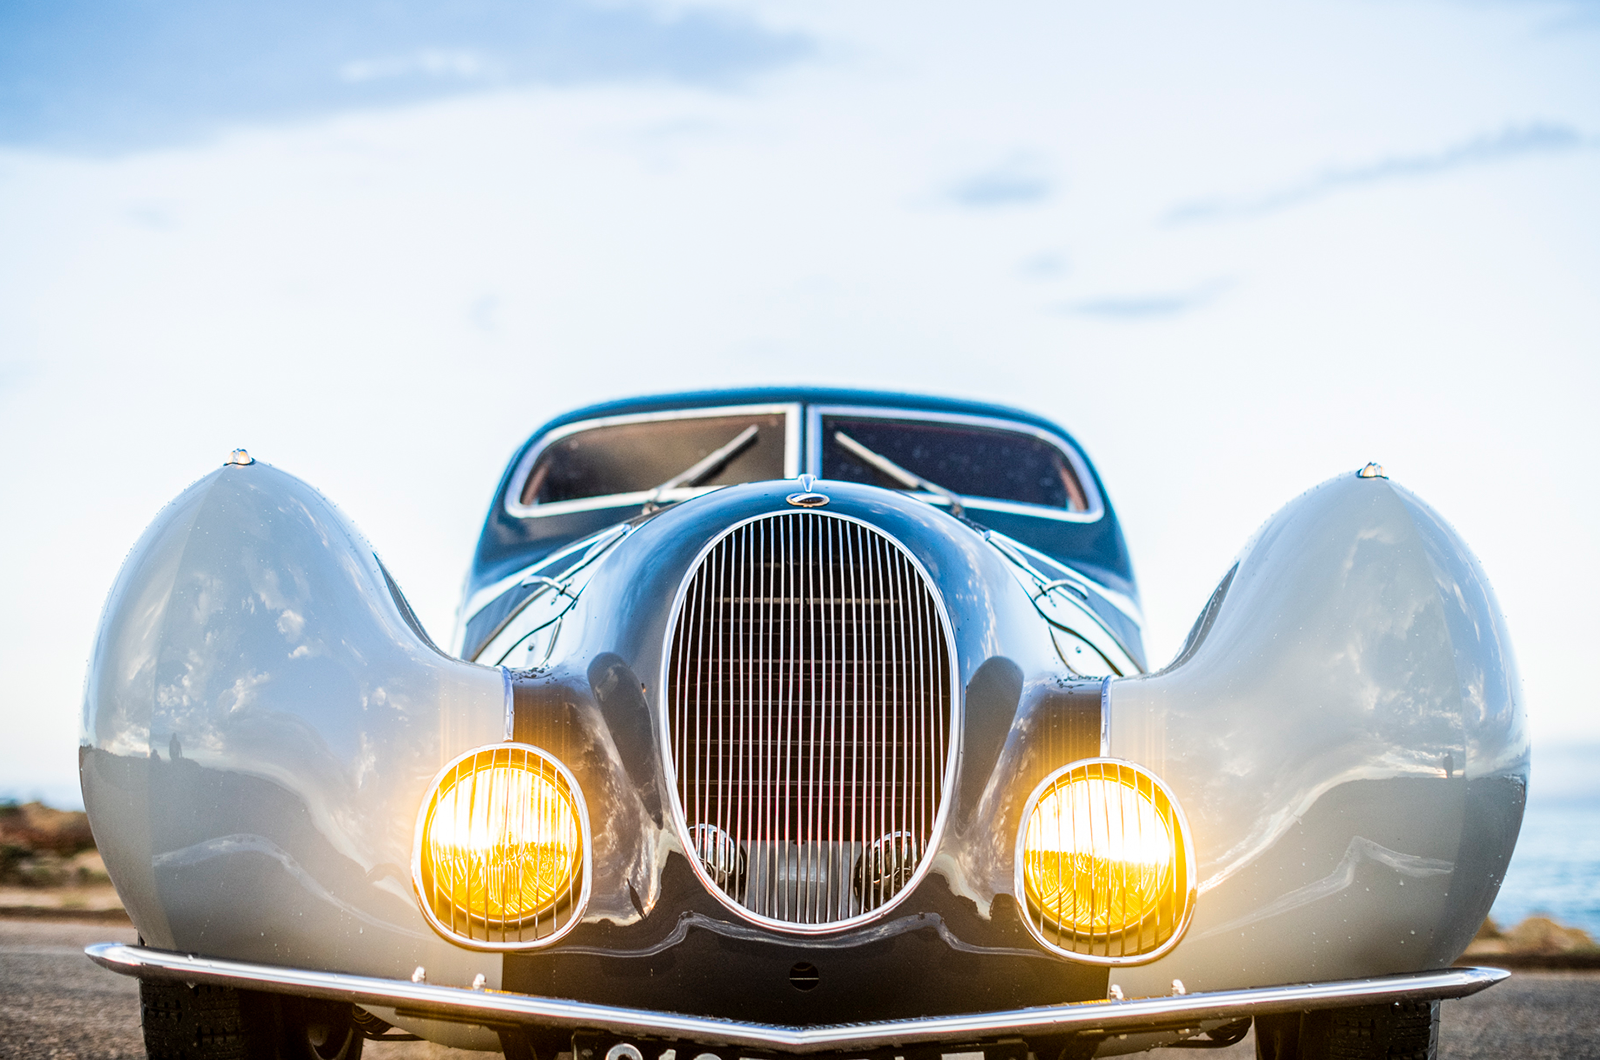 Classic & Sports Car – See this stunning Talbot-Lago at Concours of Elegance